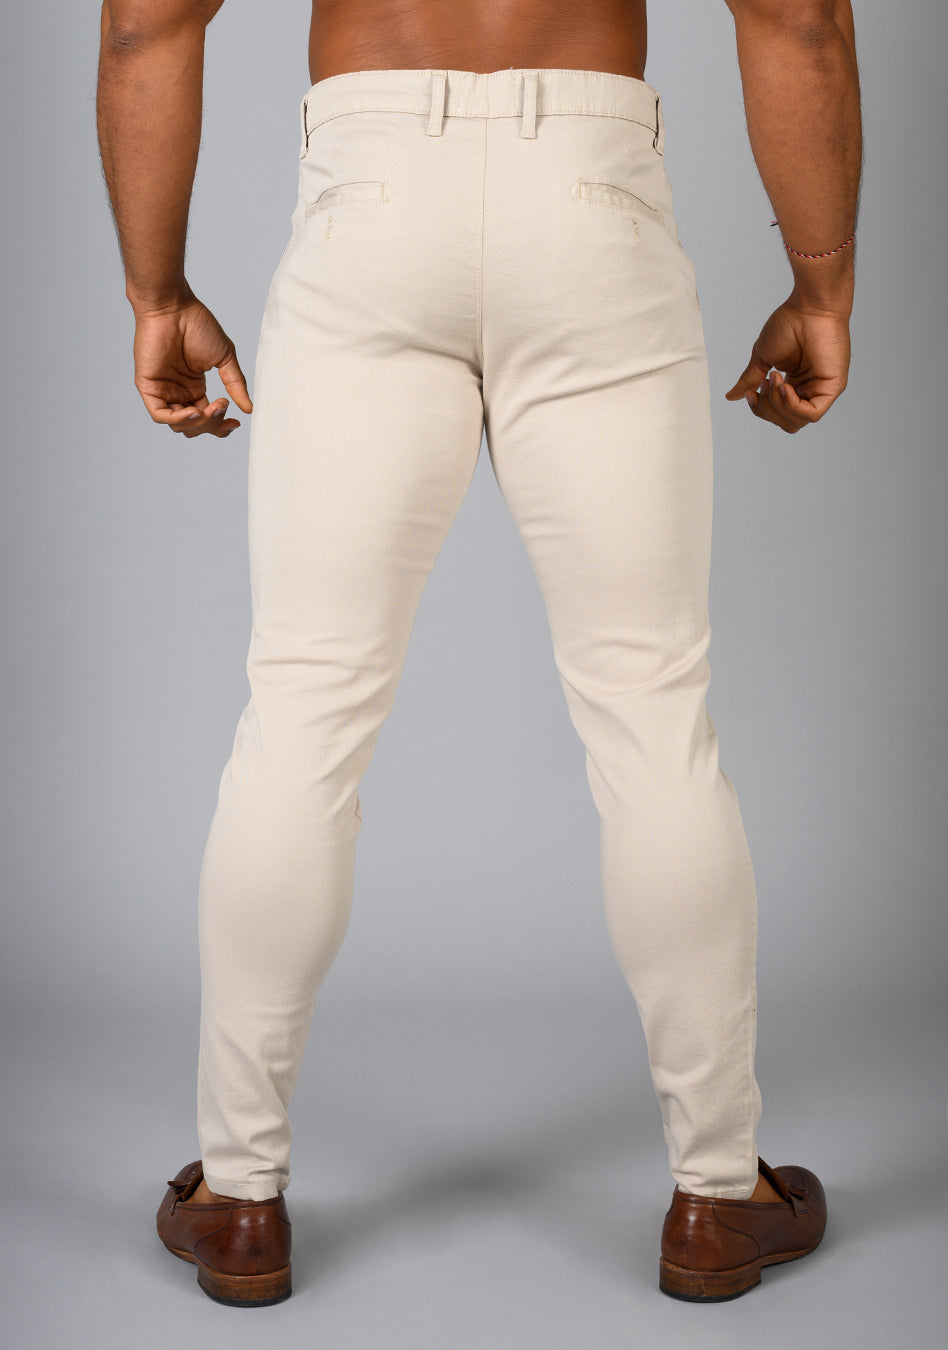 Best Chinos for Bodybuilders by Oxcloth